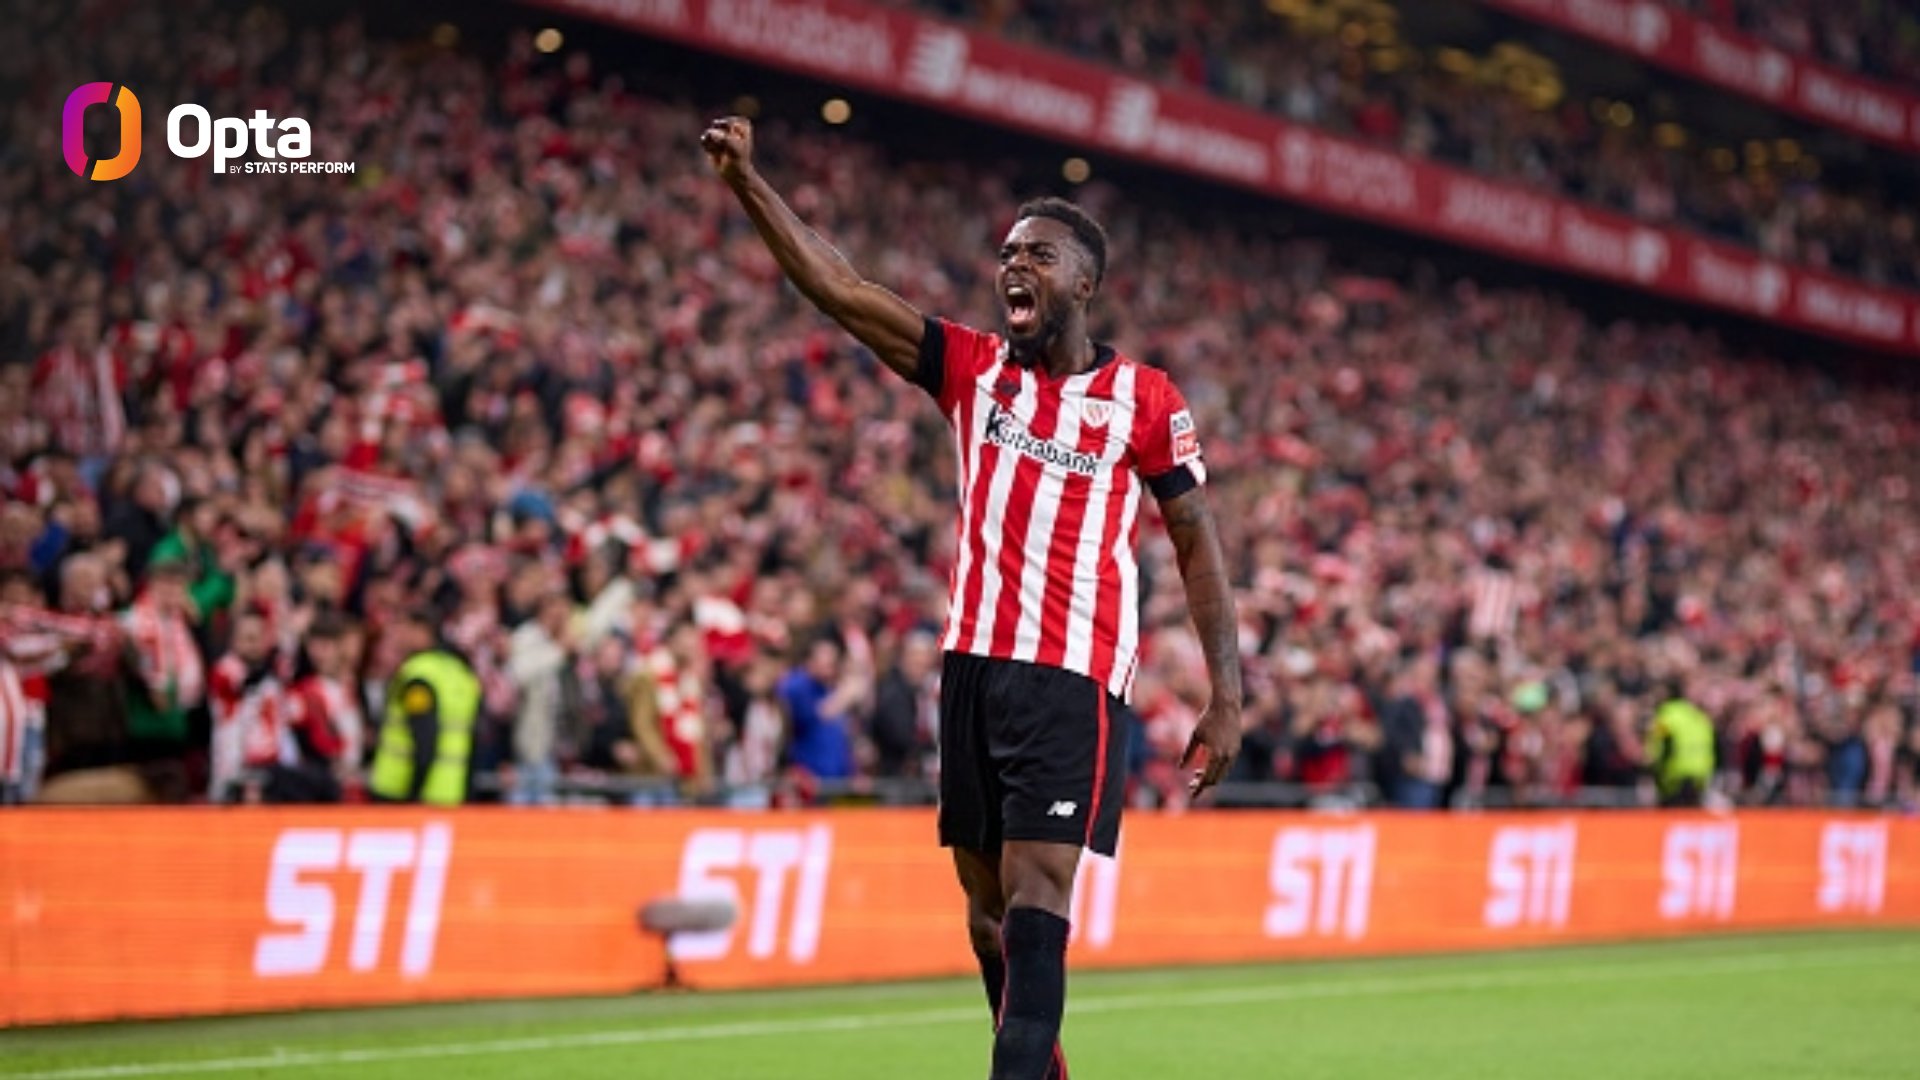 Inaki Williams reaches double figures for just second time in LaLiga after goal against Celta Vigo